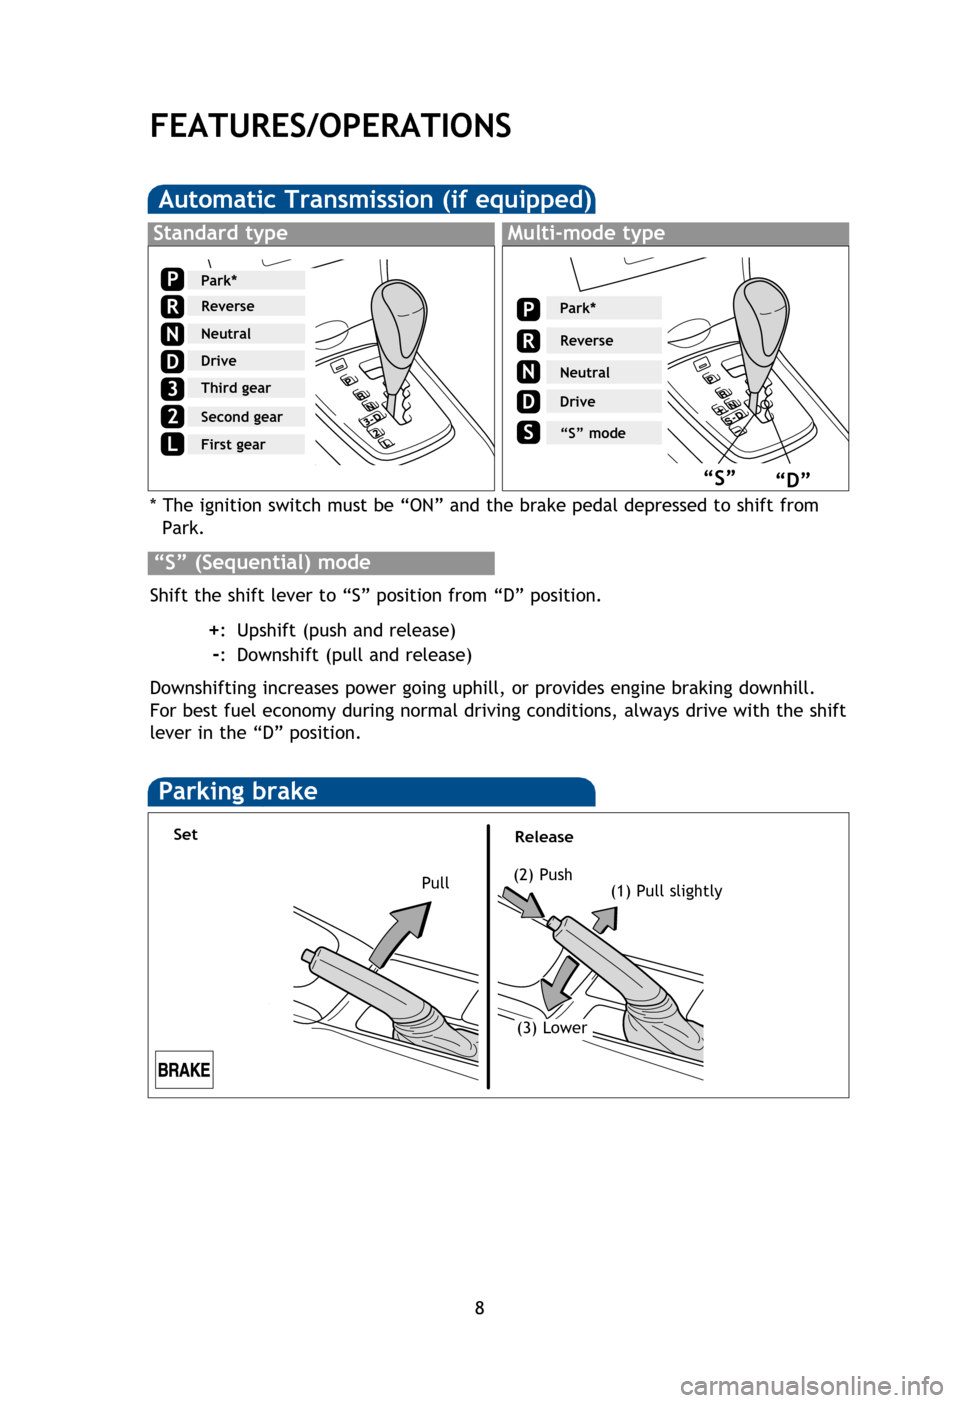 TOYOTA COROLLA 2013 11.G Quick Reference Guide 8
Auto lock/unlock (if equipped)
Automatic door locks can be programmed to operate in two different modes, or 
turned OFF.
-Doors lock when shifting from Park.
-Doors lock when the vehicle speed is ap